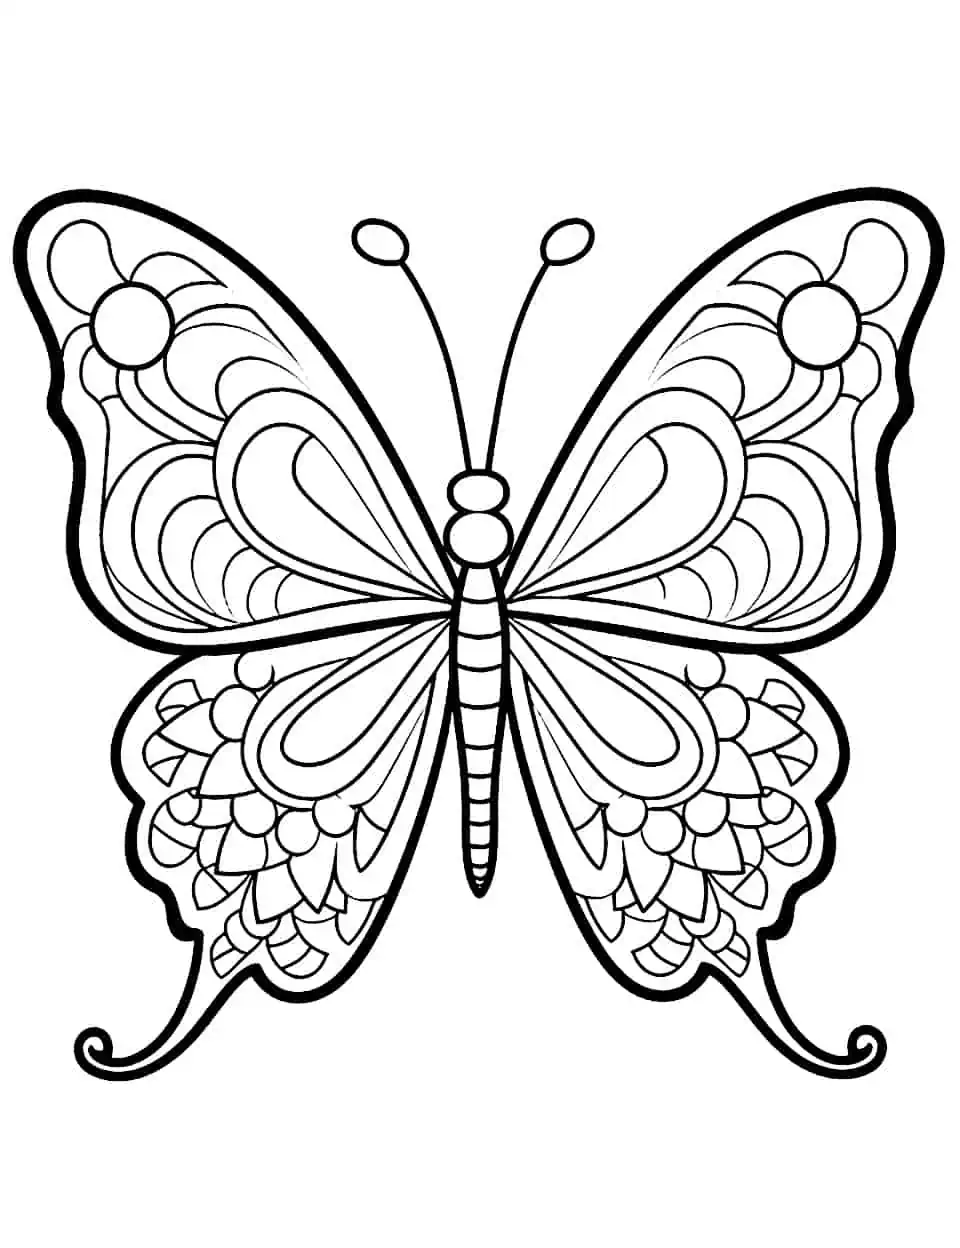 Kaleidoscope Colors Butterfly Coloring Page - A mesmerizing mandala-style coloring page with a butterfly at the center.